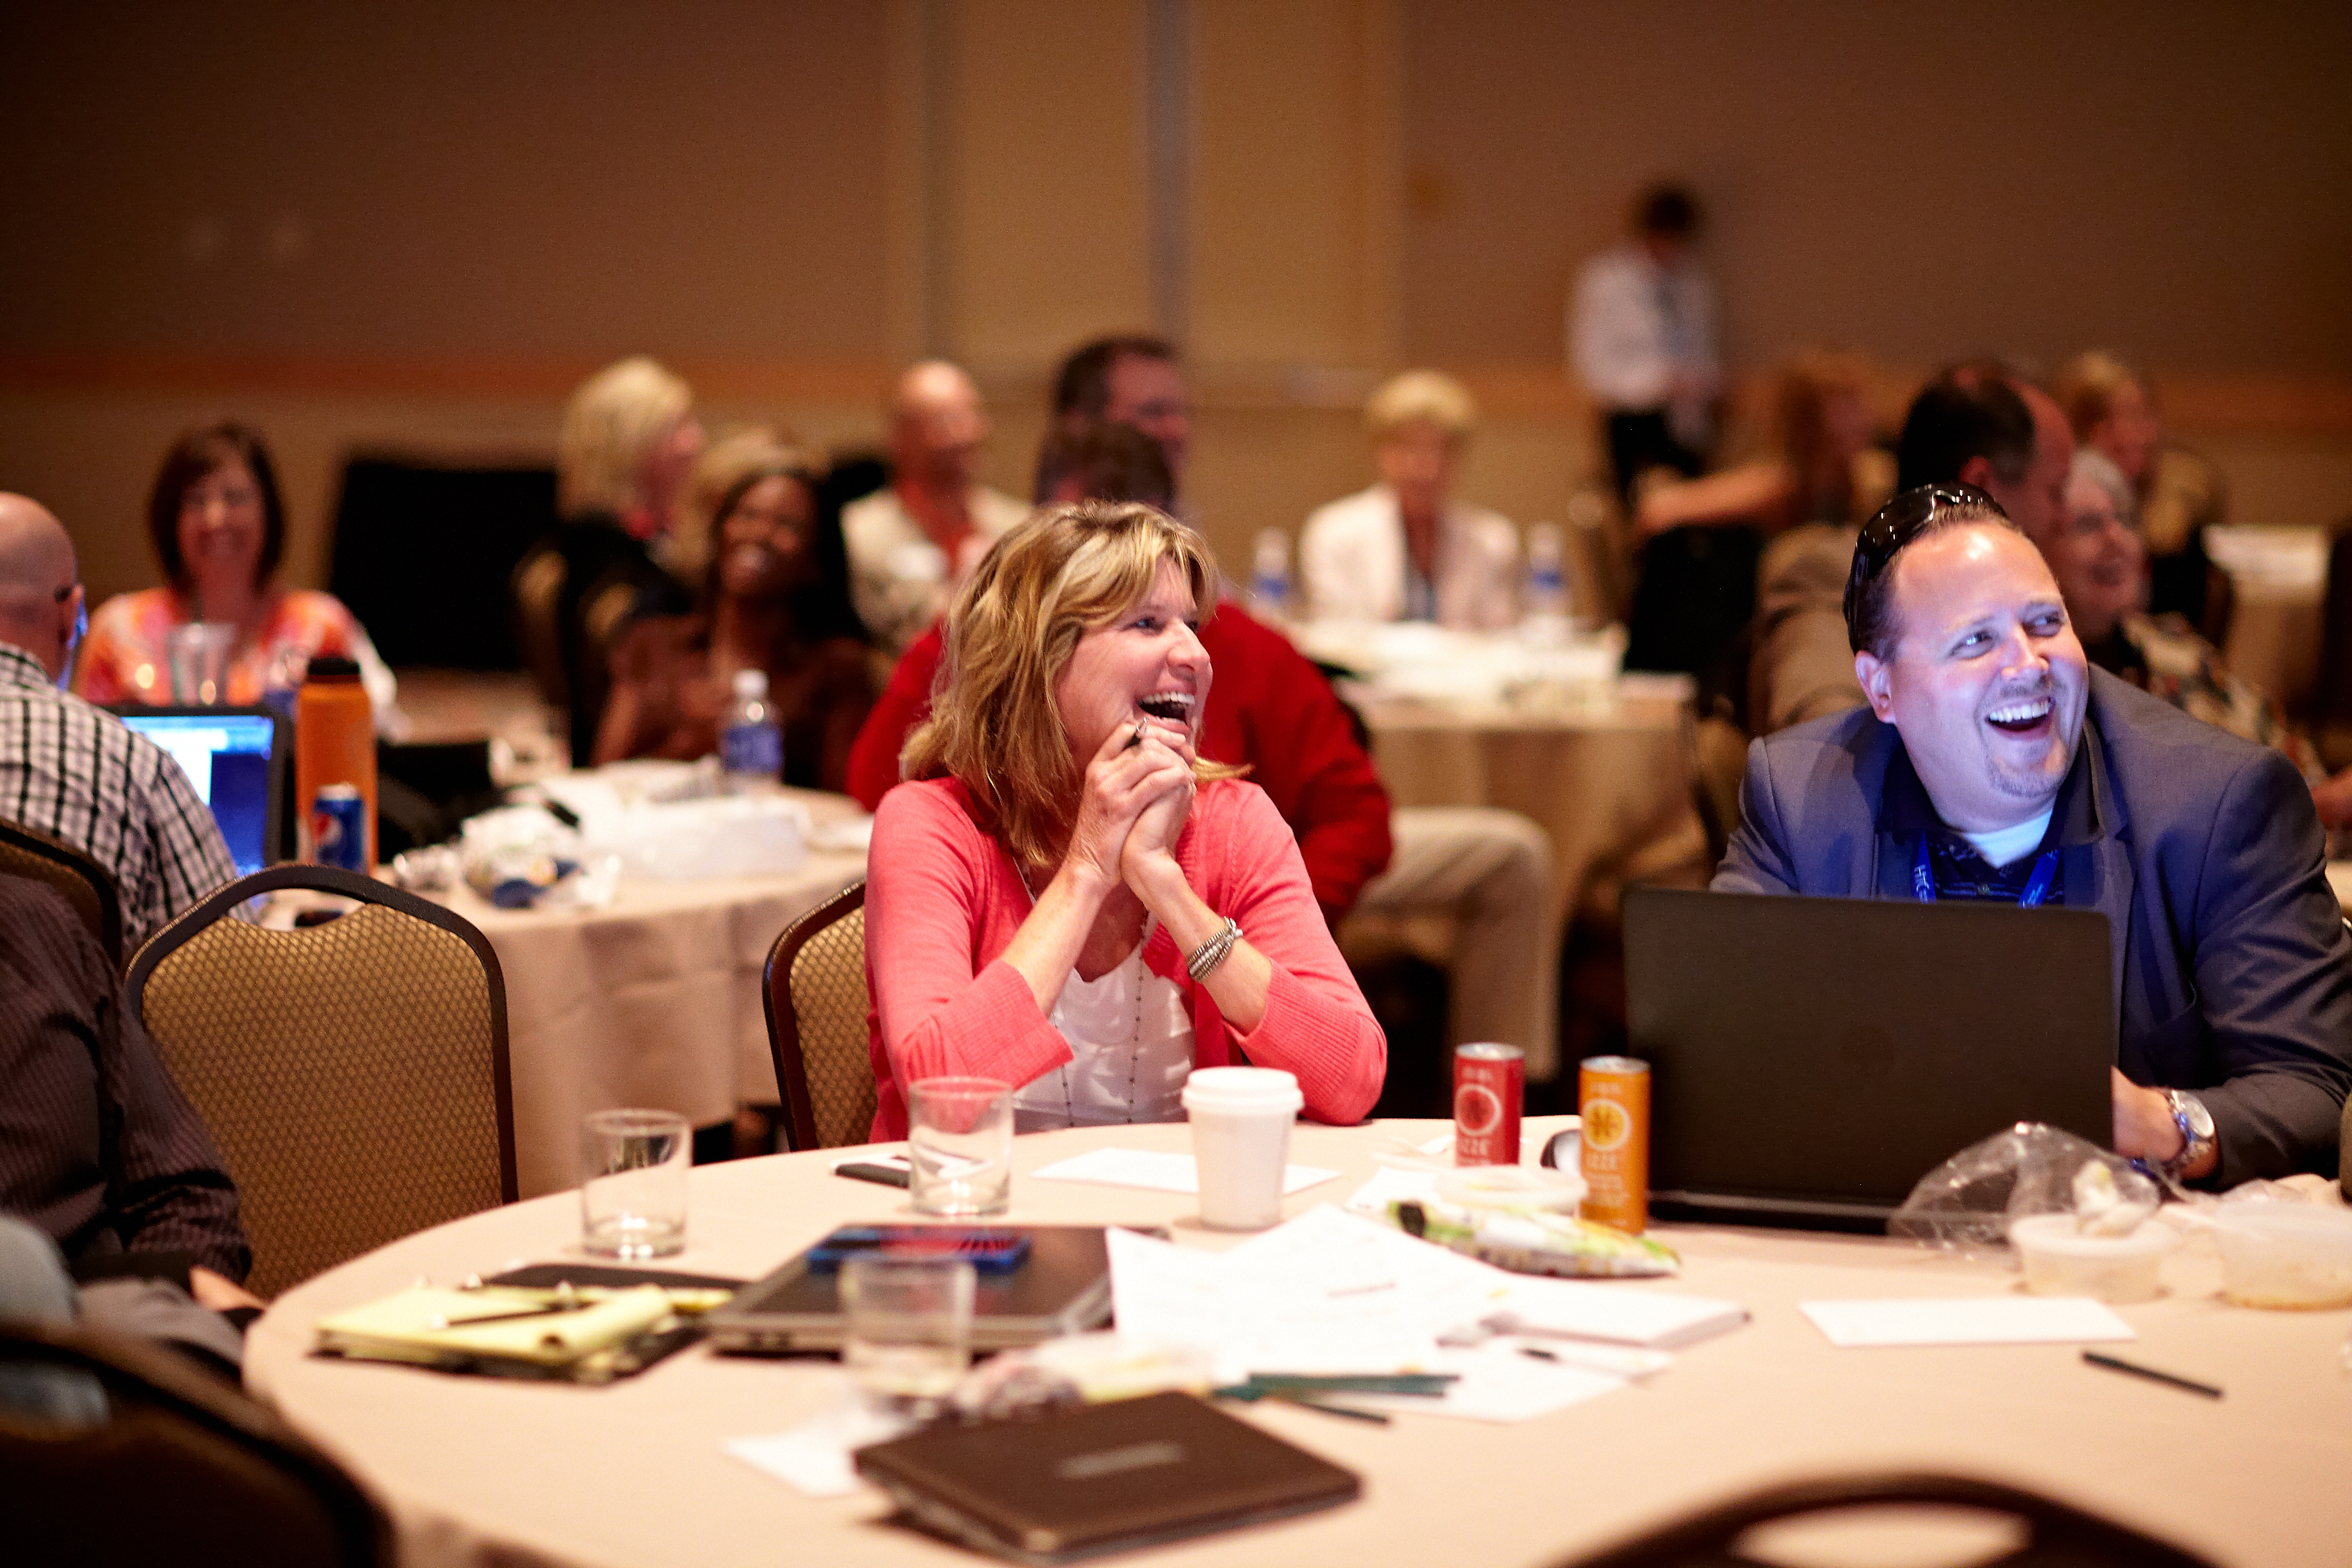 Image of two event attendees smiling during a Keynote speaker presentation